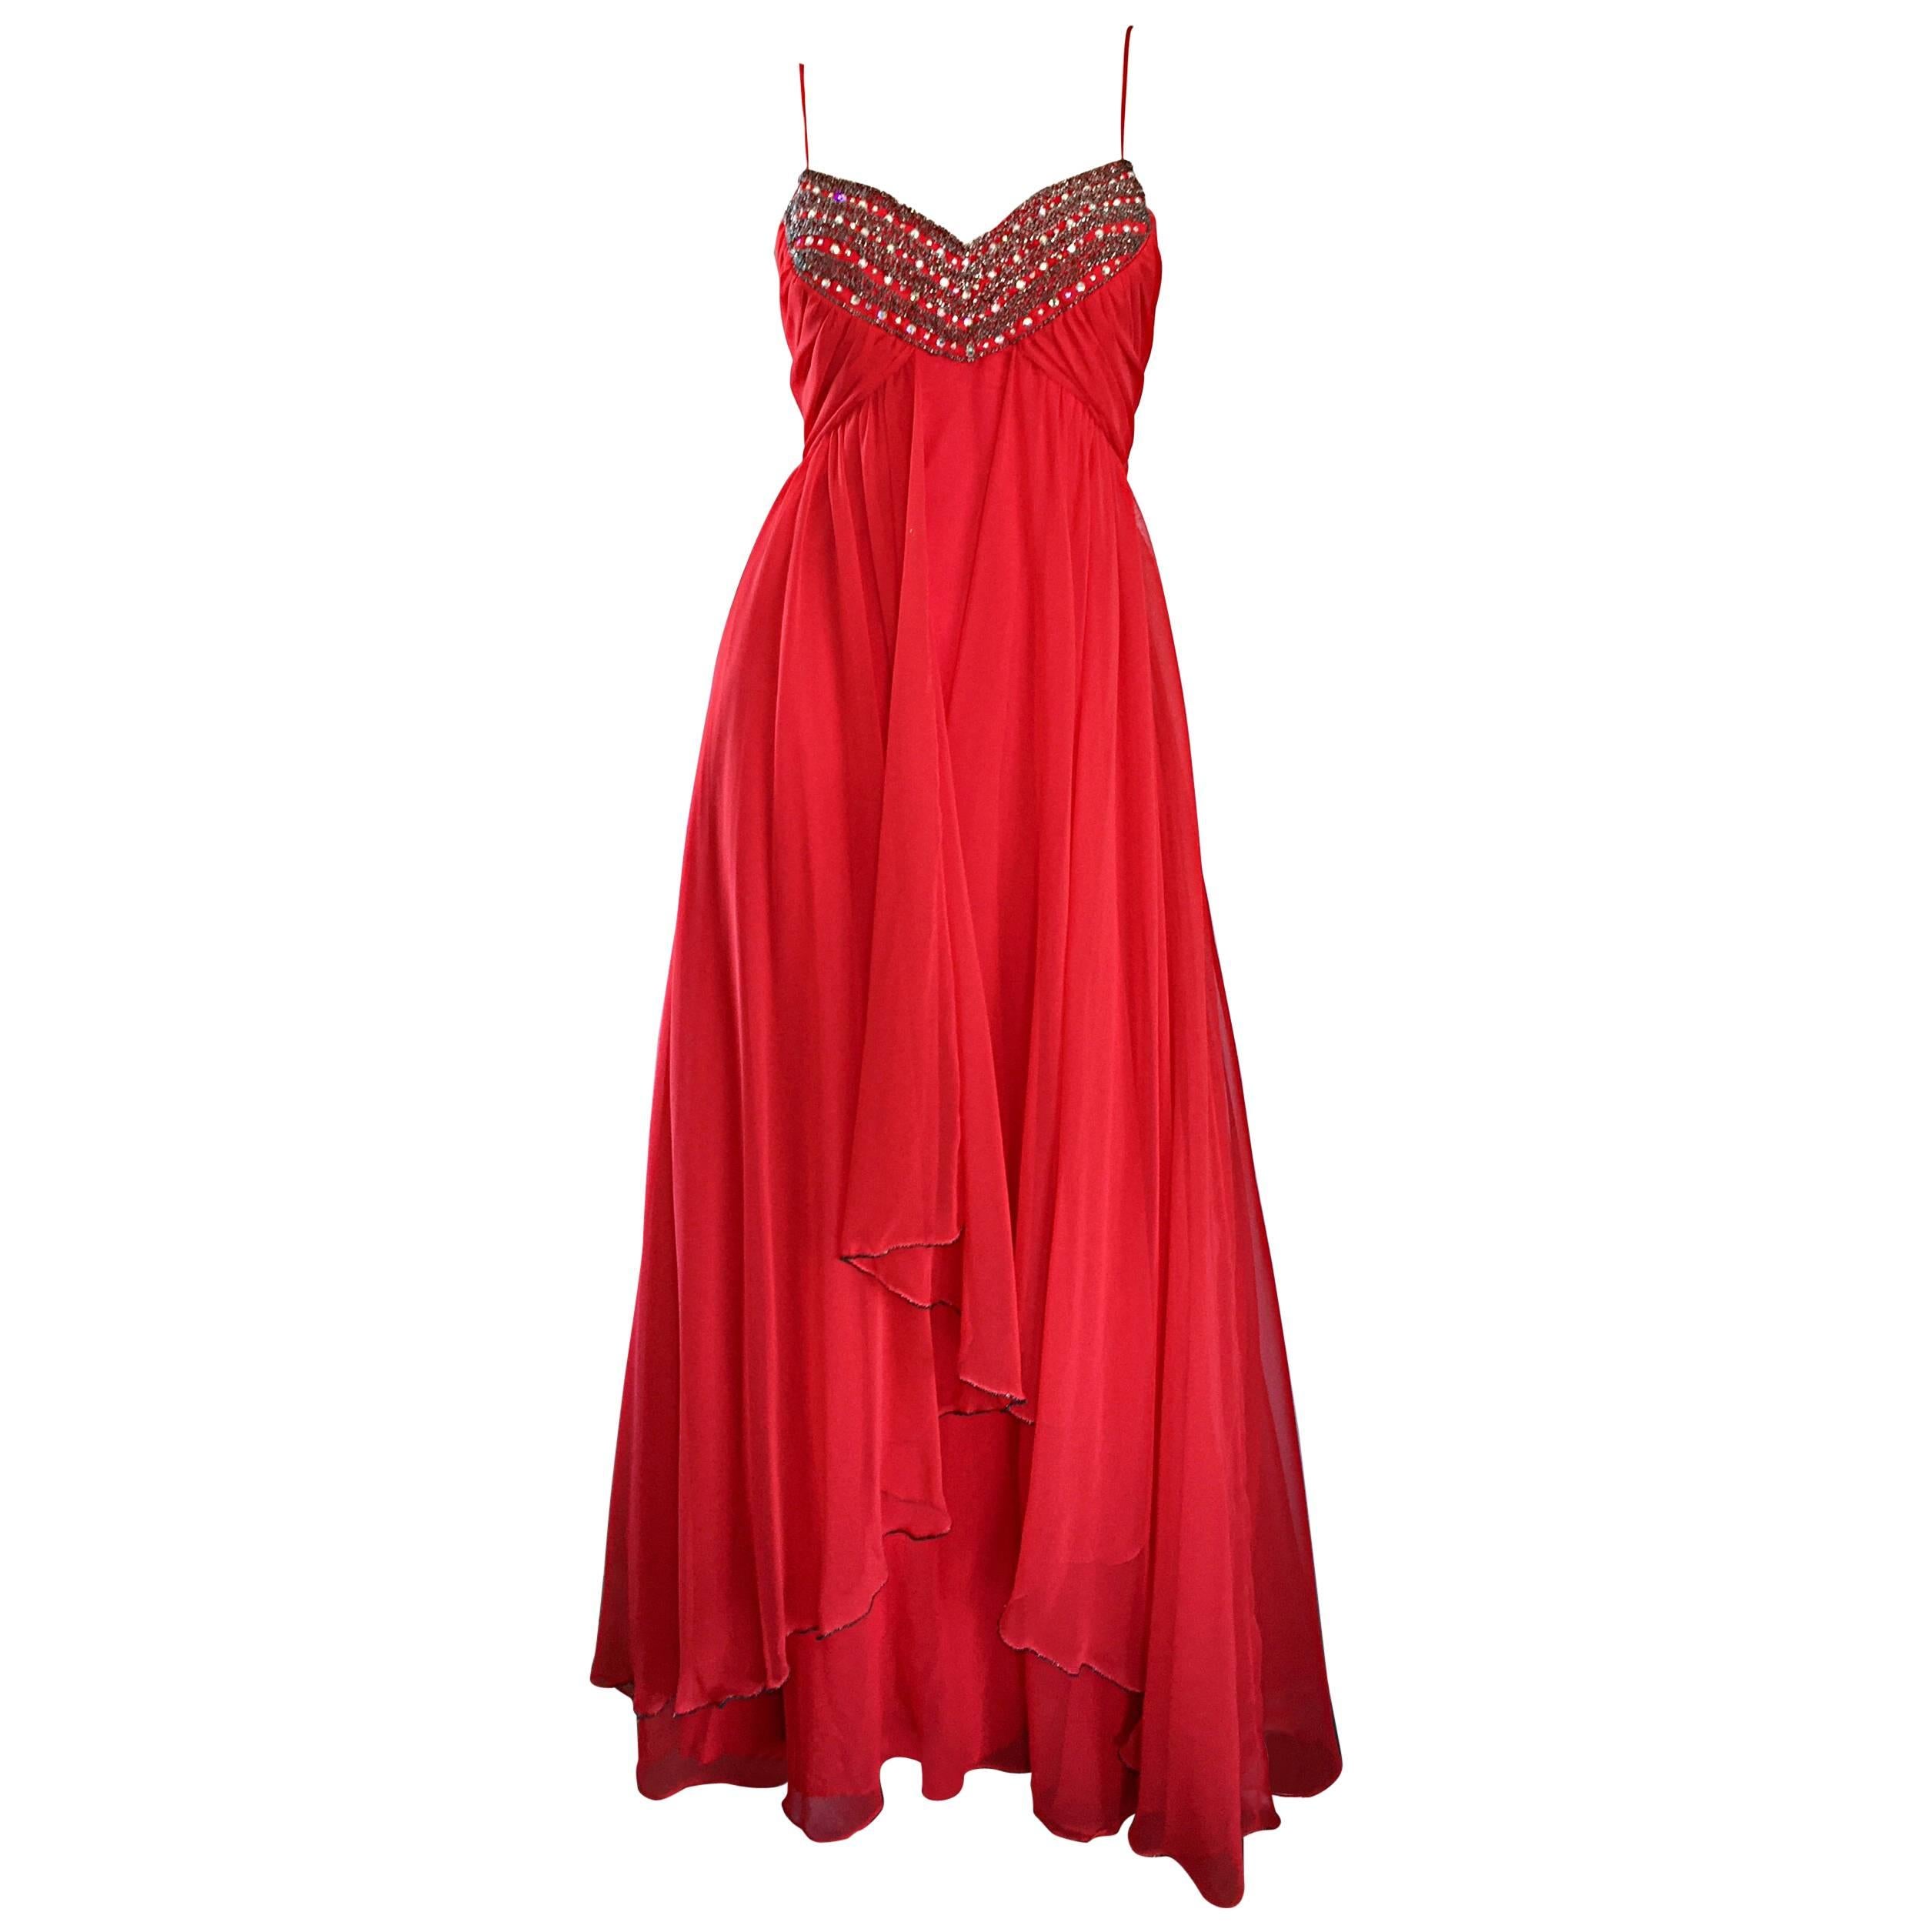 Exquisite 1970s Lipstick Red Chiffon Rhinestone Beaded Vintage 70s Goddess Gown 